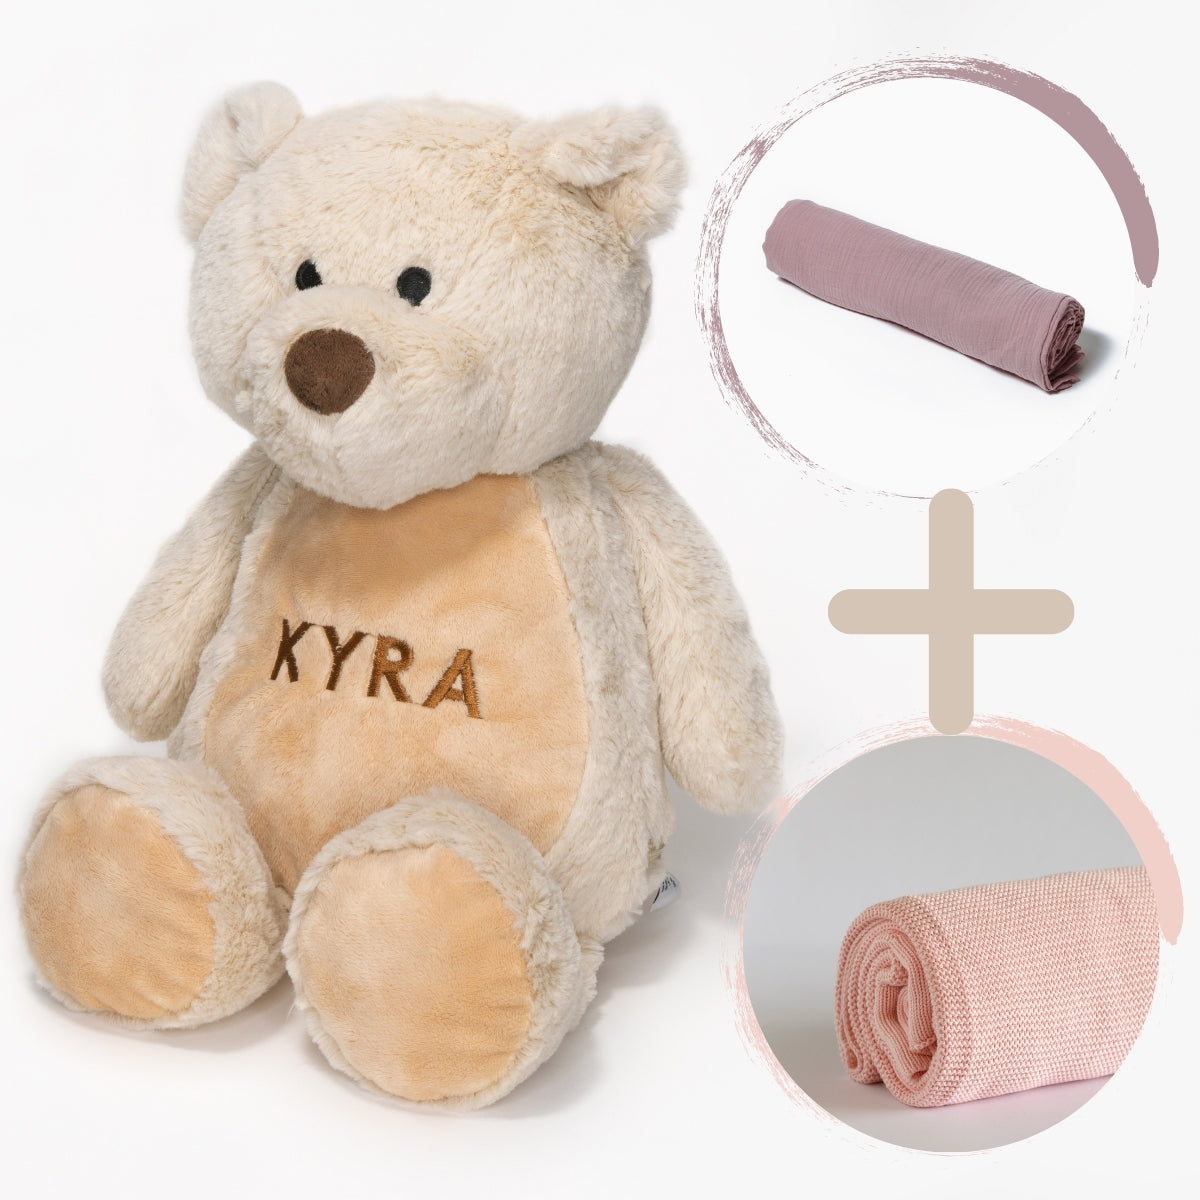 Personalised Baby Blanket, Muslin Baby Swaddle and Soft Bear Teddy Bundle